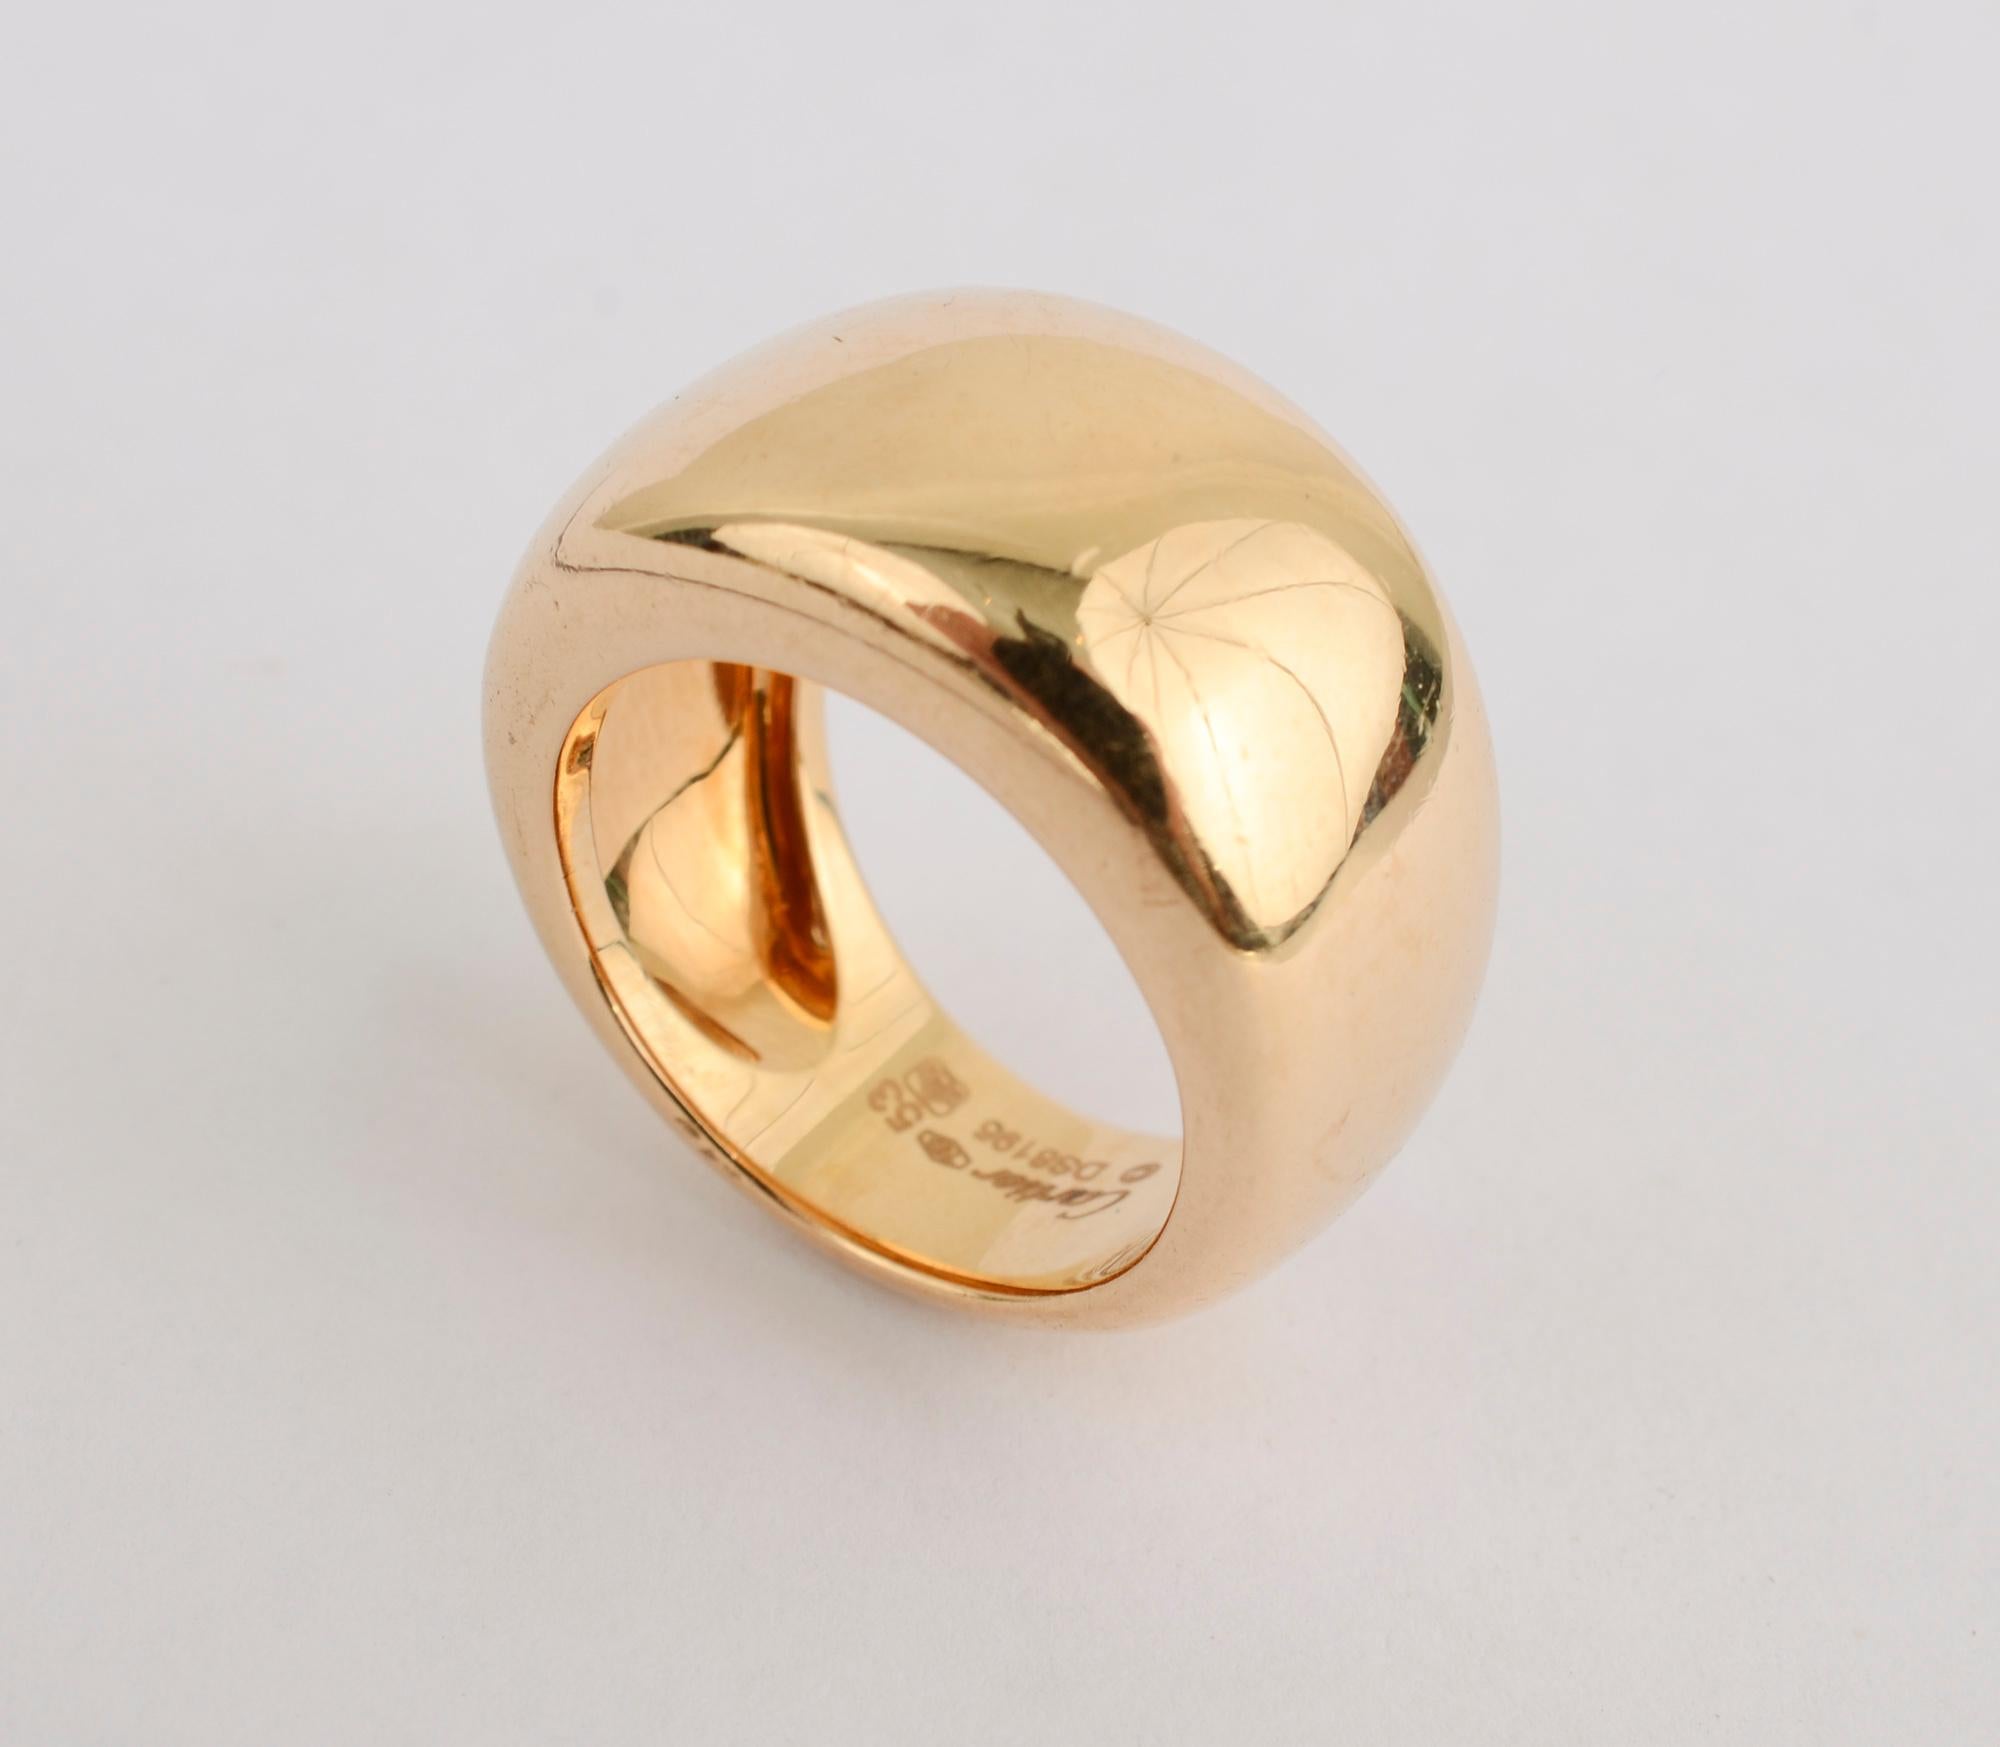 This Cartier ring is the ultimate in elegant simplicity. The ring is half an inch from front to back tapering to one quarter of an inch on the shank. It is slightly domed. The ring is size 6 1/4 but can be sized up or down. The large areas of glossy